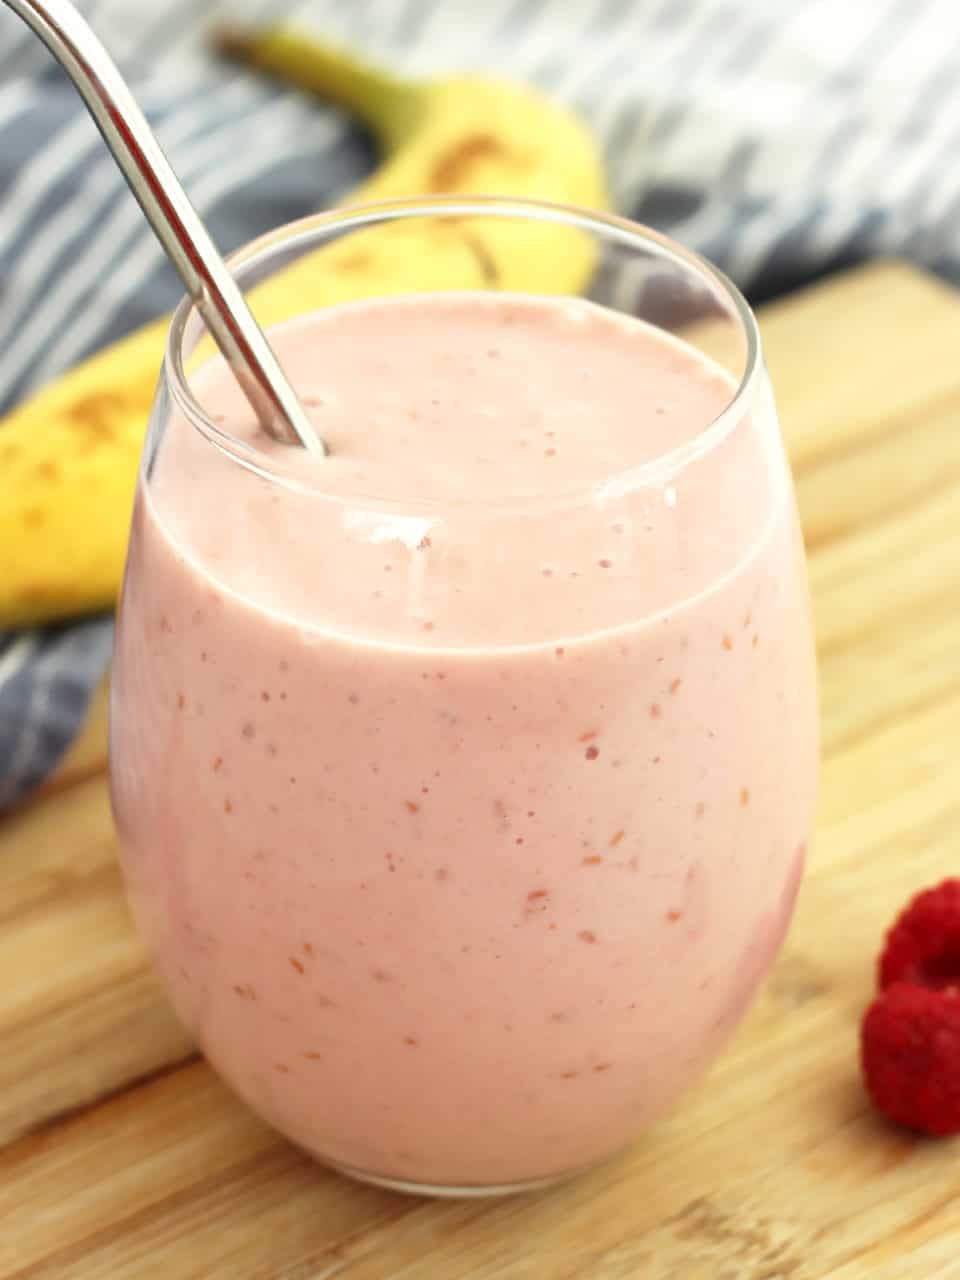 A raspberry banana smoothie in a tall glass next to fresh fruits.